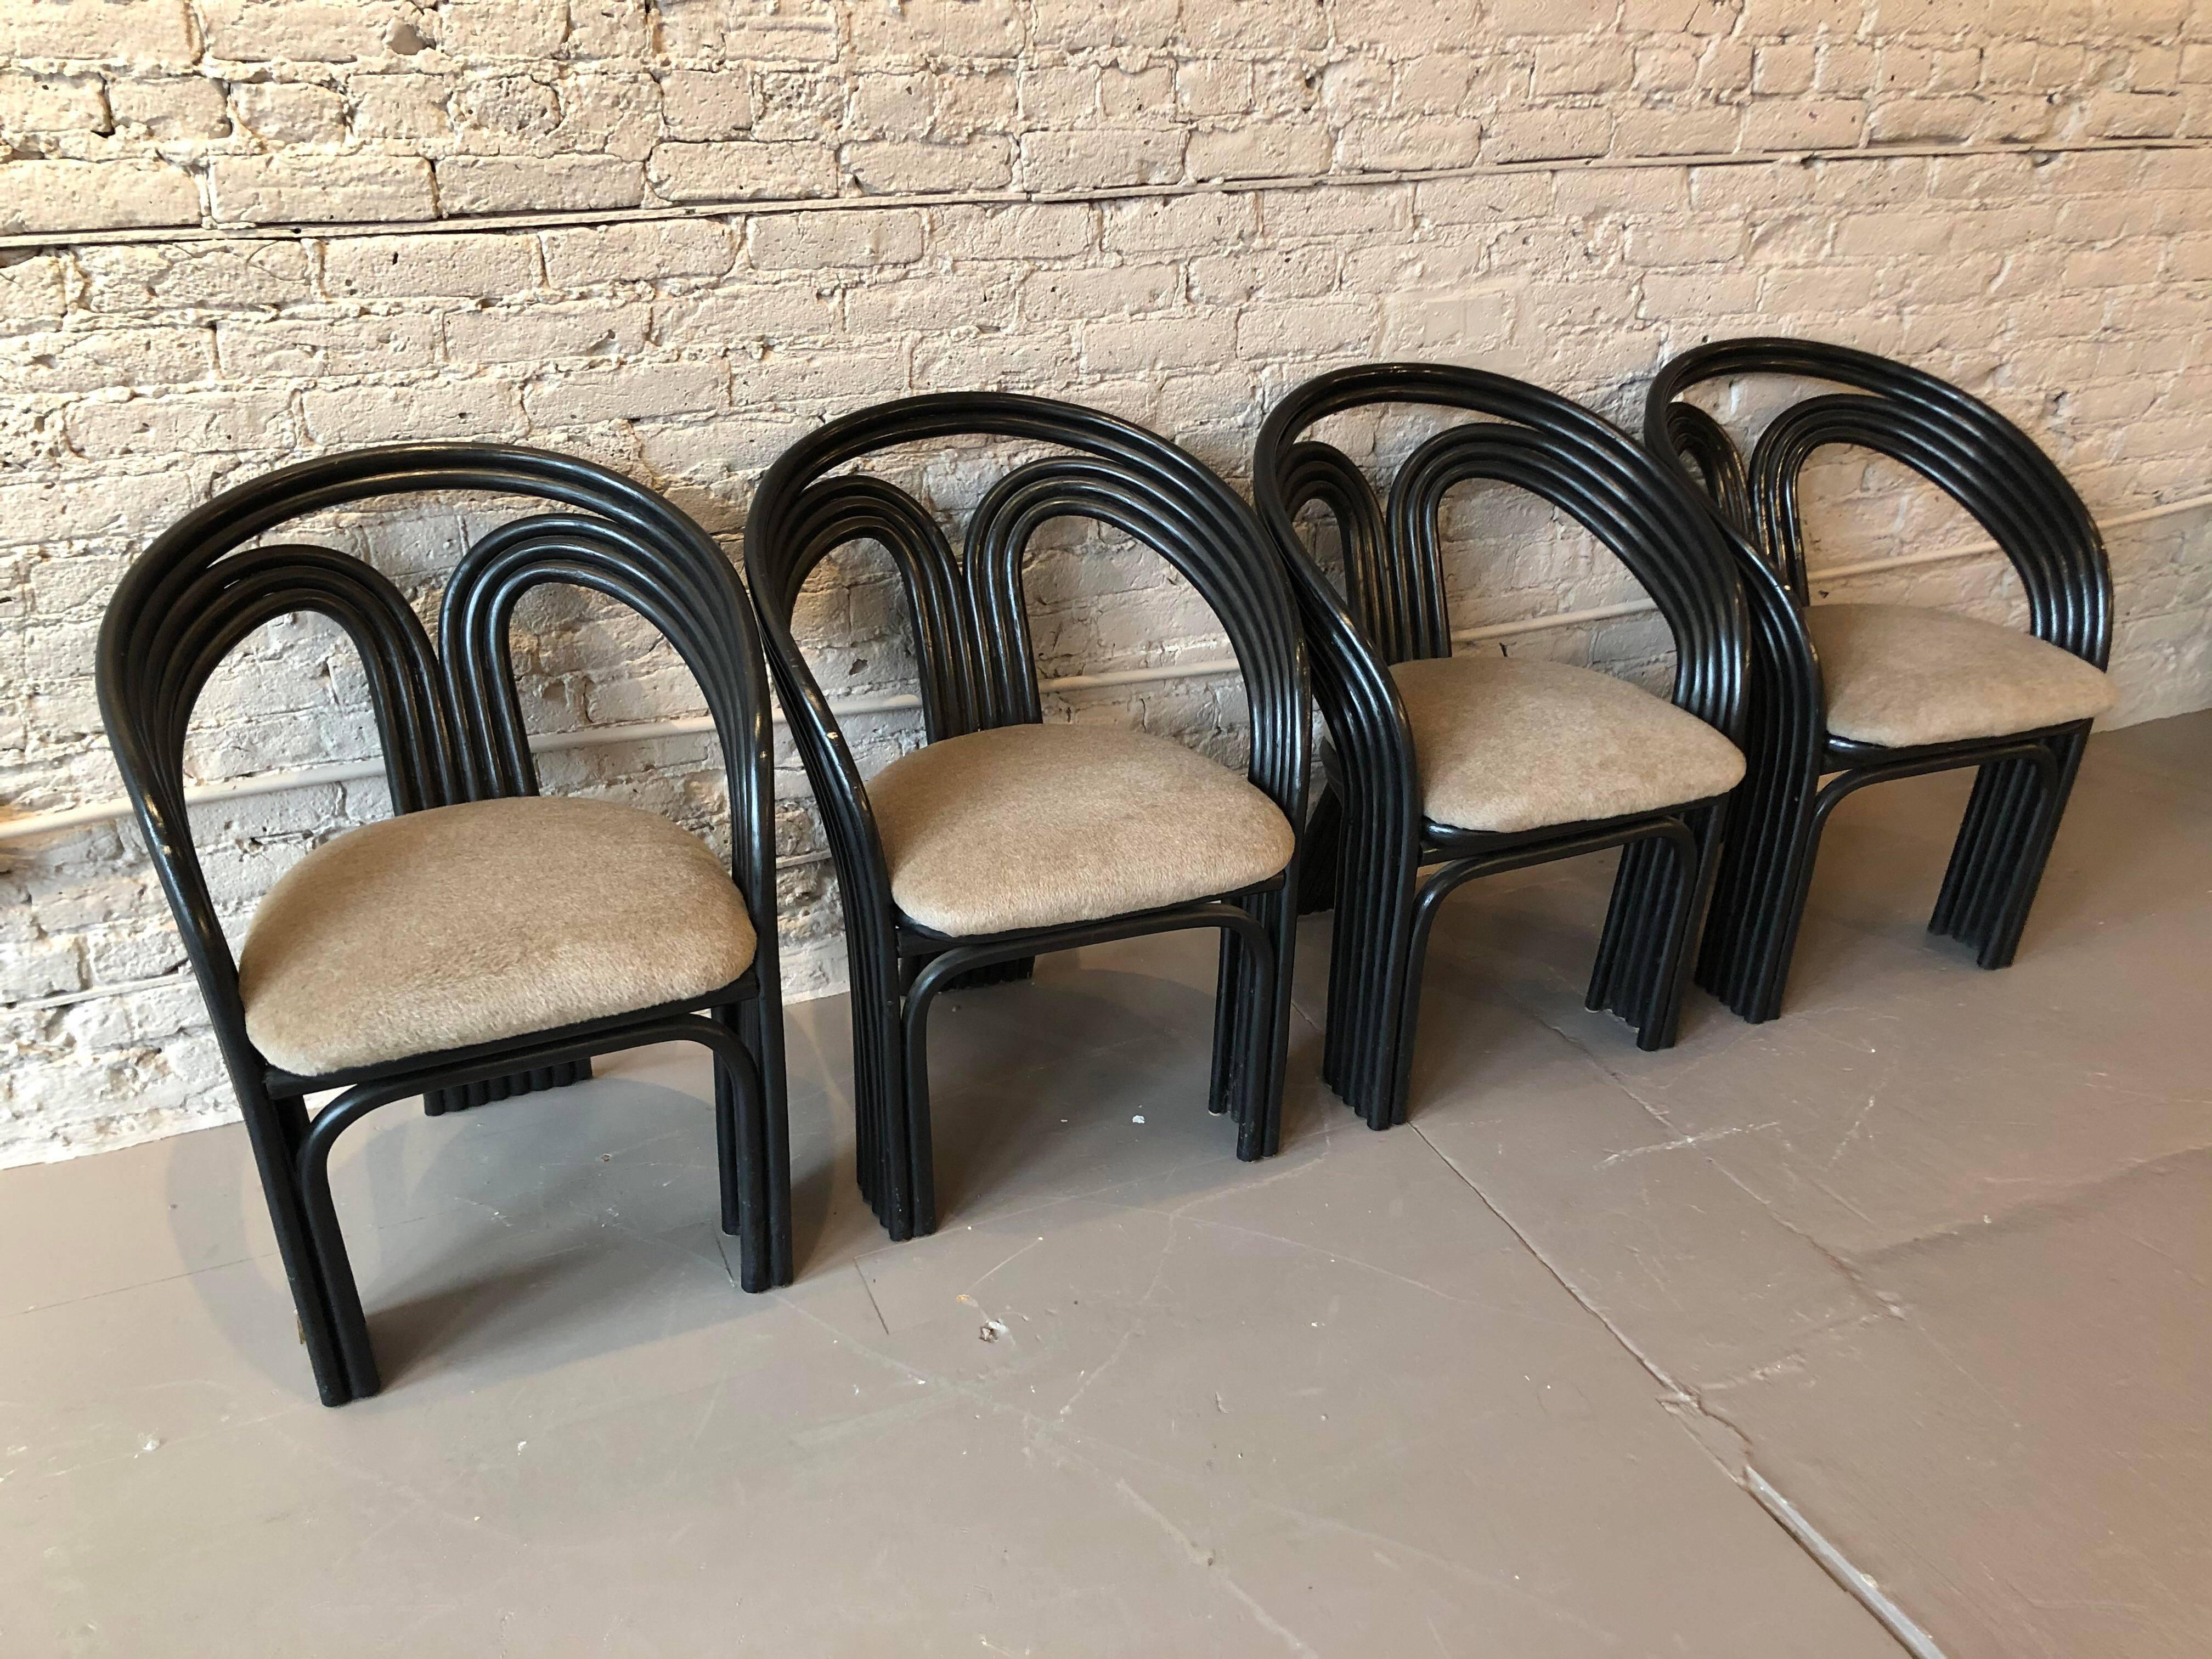 1980s Bamboo dining chairs in the manner of Axel Enthoven for Rohe Noordwoolde - Set of 4

Beautiful sculptural and comfortable! Restored in taupe plush mohair. The curved back is so relaxing to spend hours in. No labels - but believed to be Rohe.